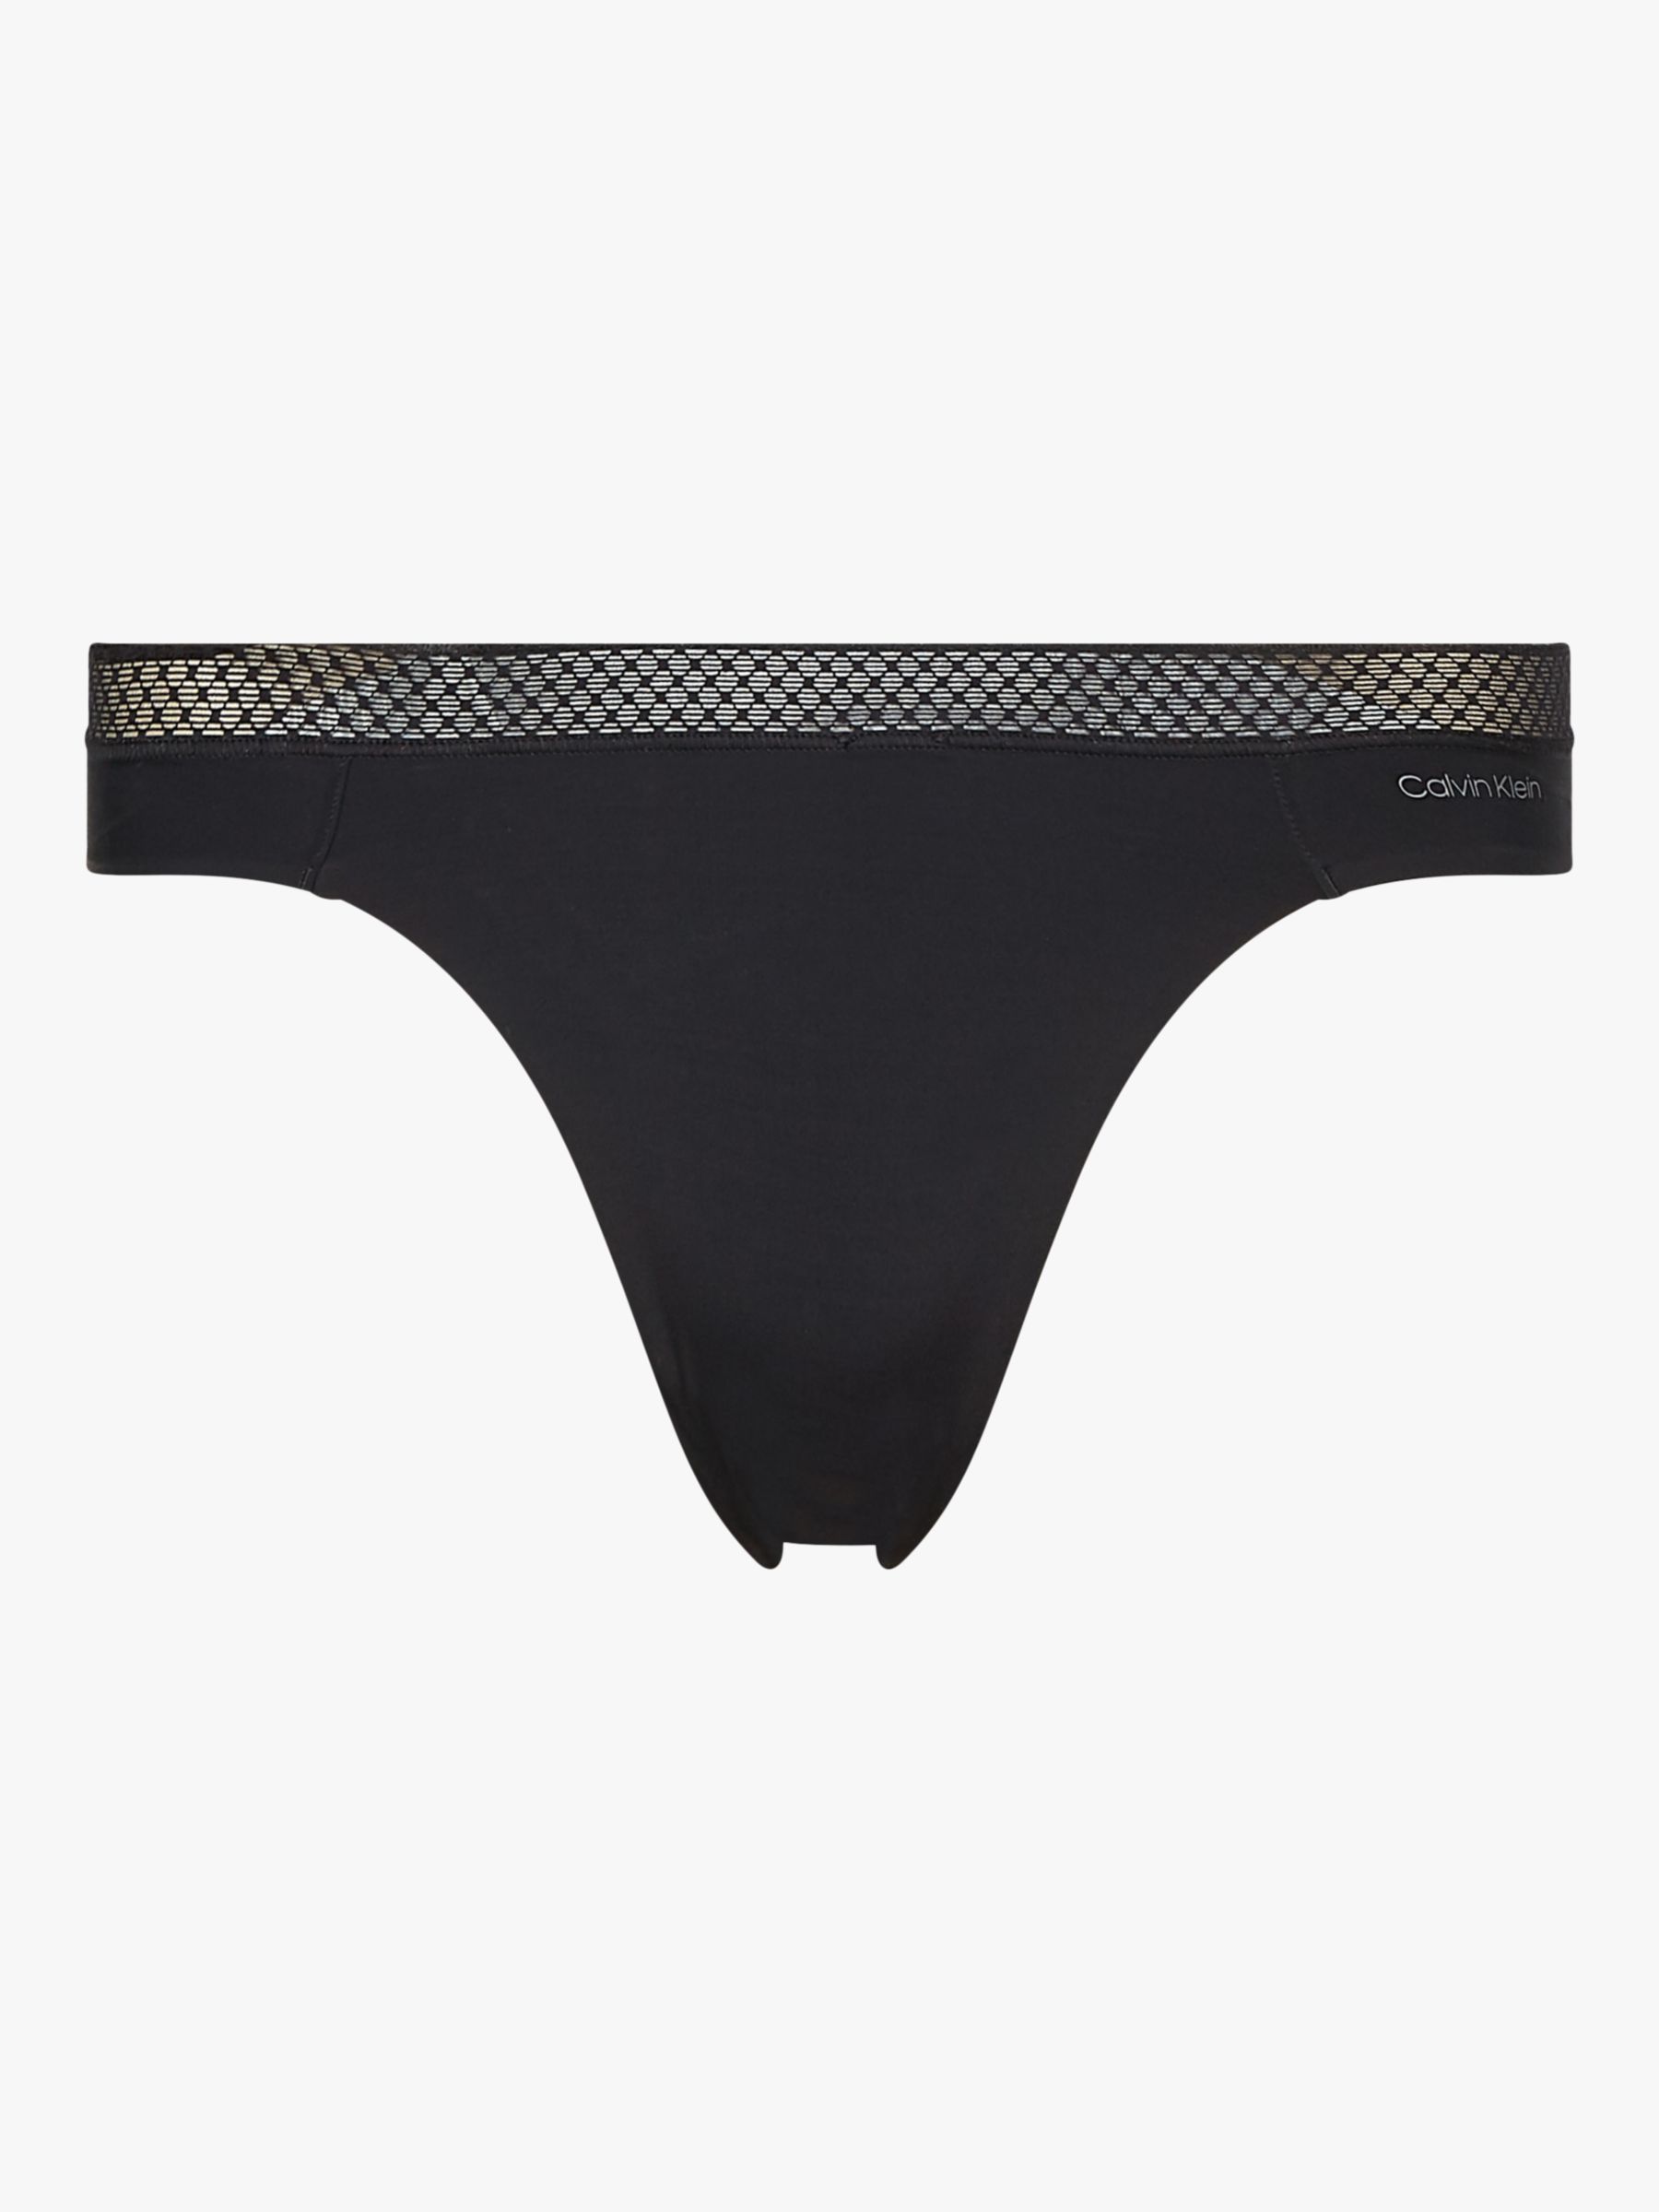 Calvin Klein Women's G-String Small Black : Clothing, Shoes & Jewelry 